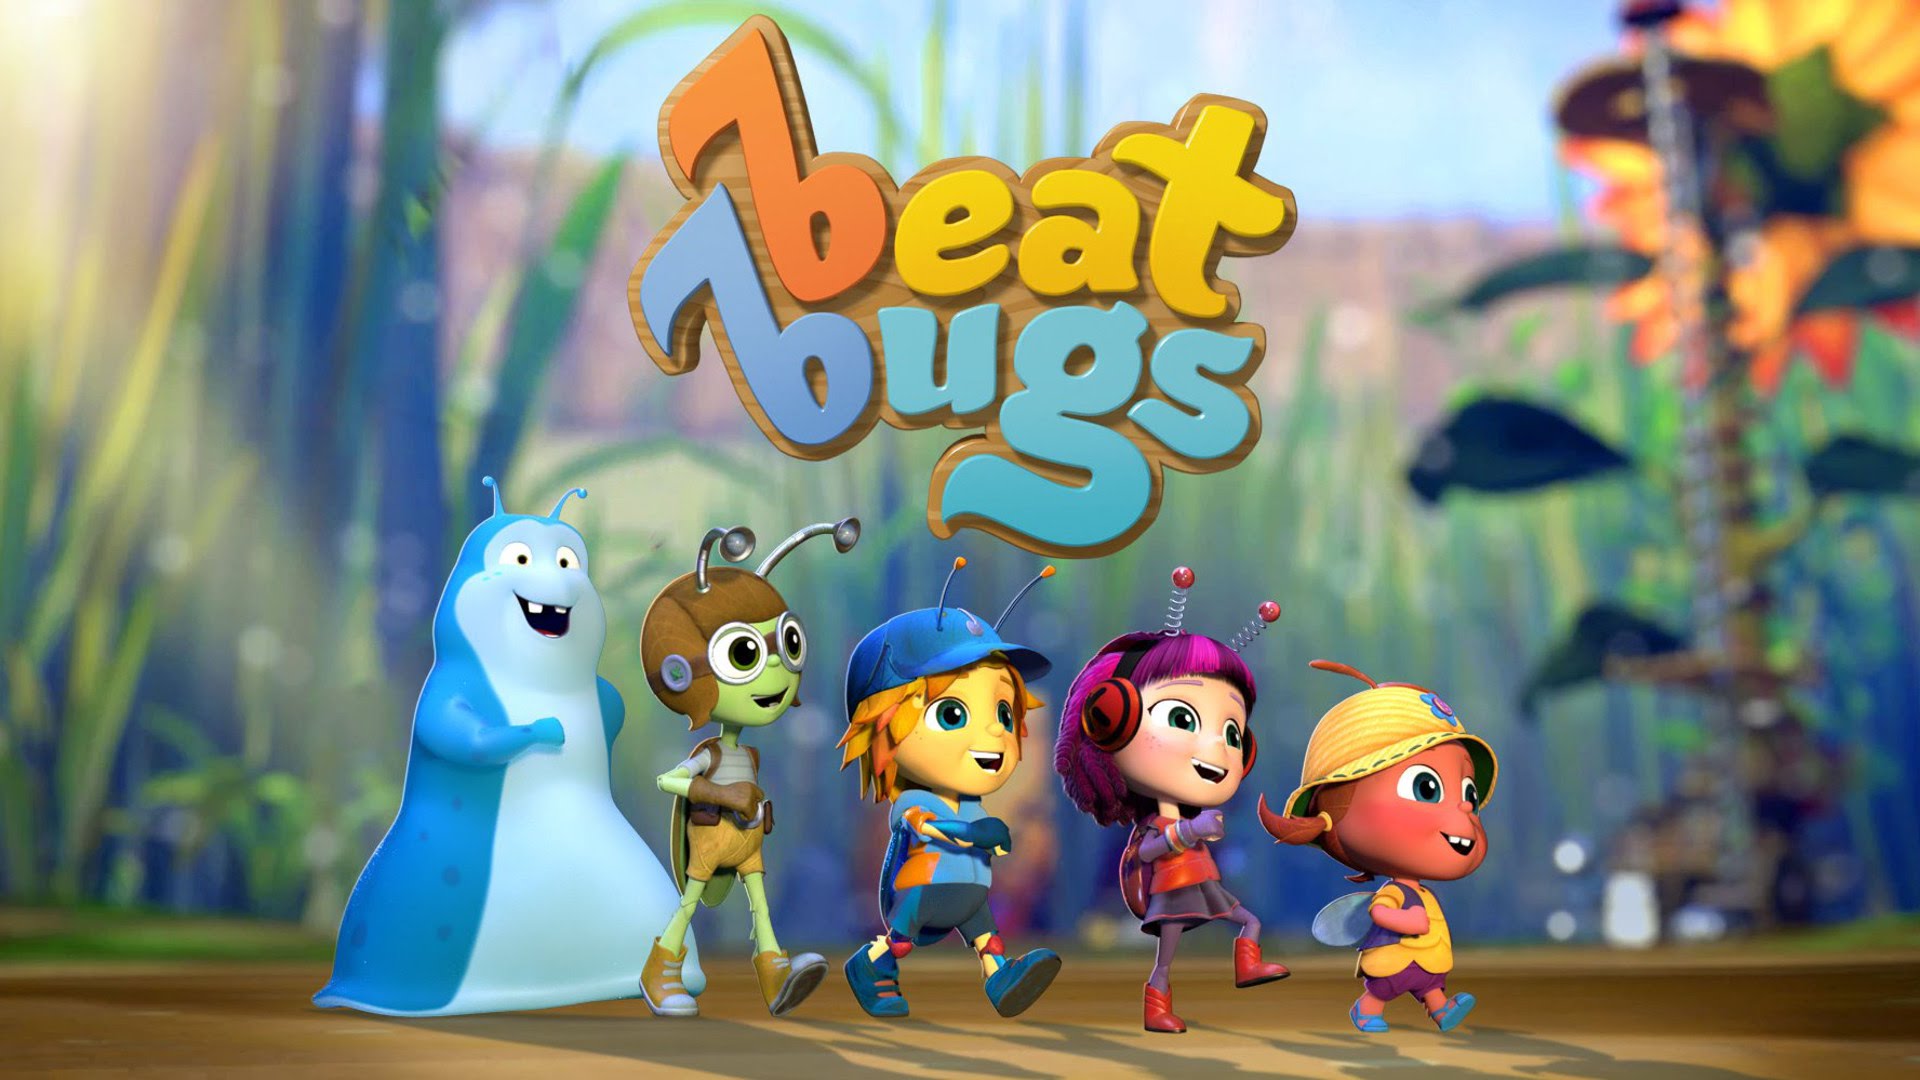 TV Show Beat Bugs HD Wallpaper | Background Image